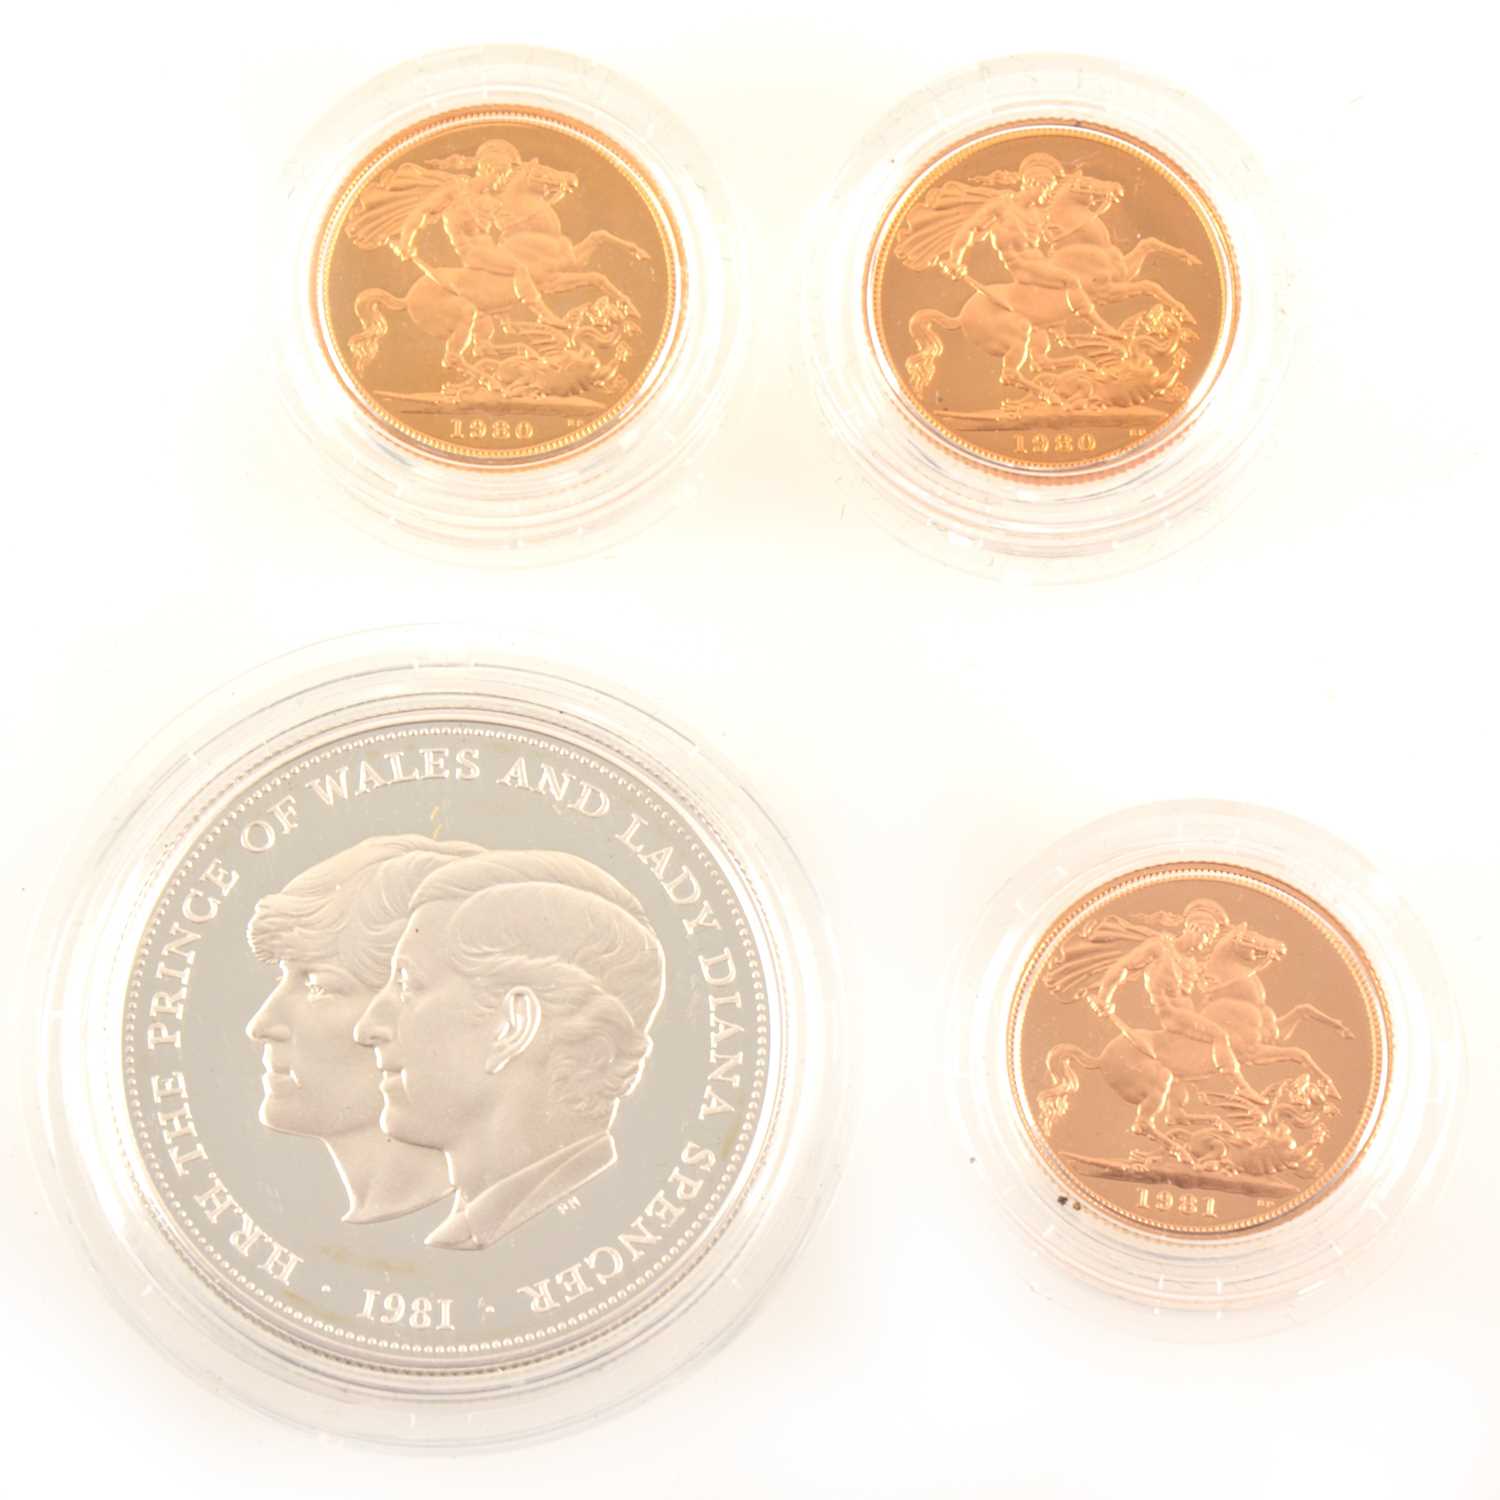 Lot 241 - Two Gold Proof Full Sovereigns and a Two-Coin Commemorative Set